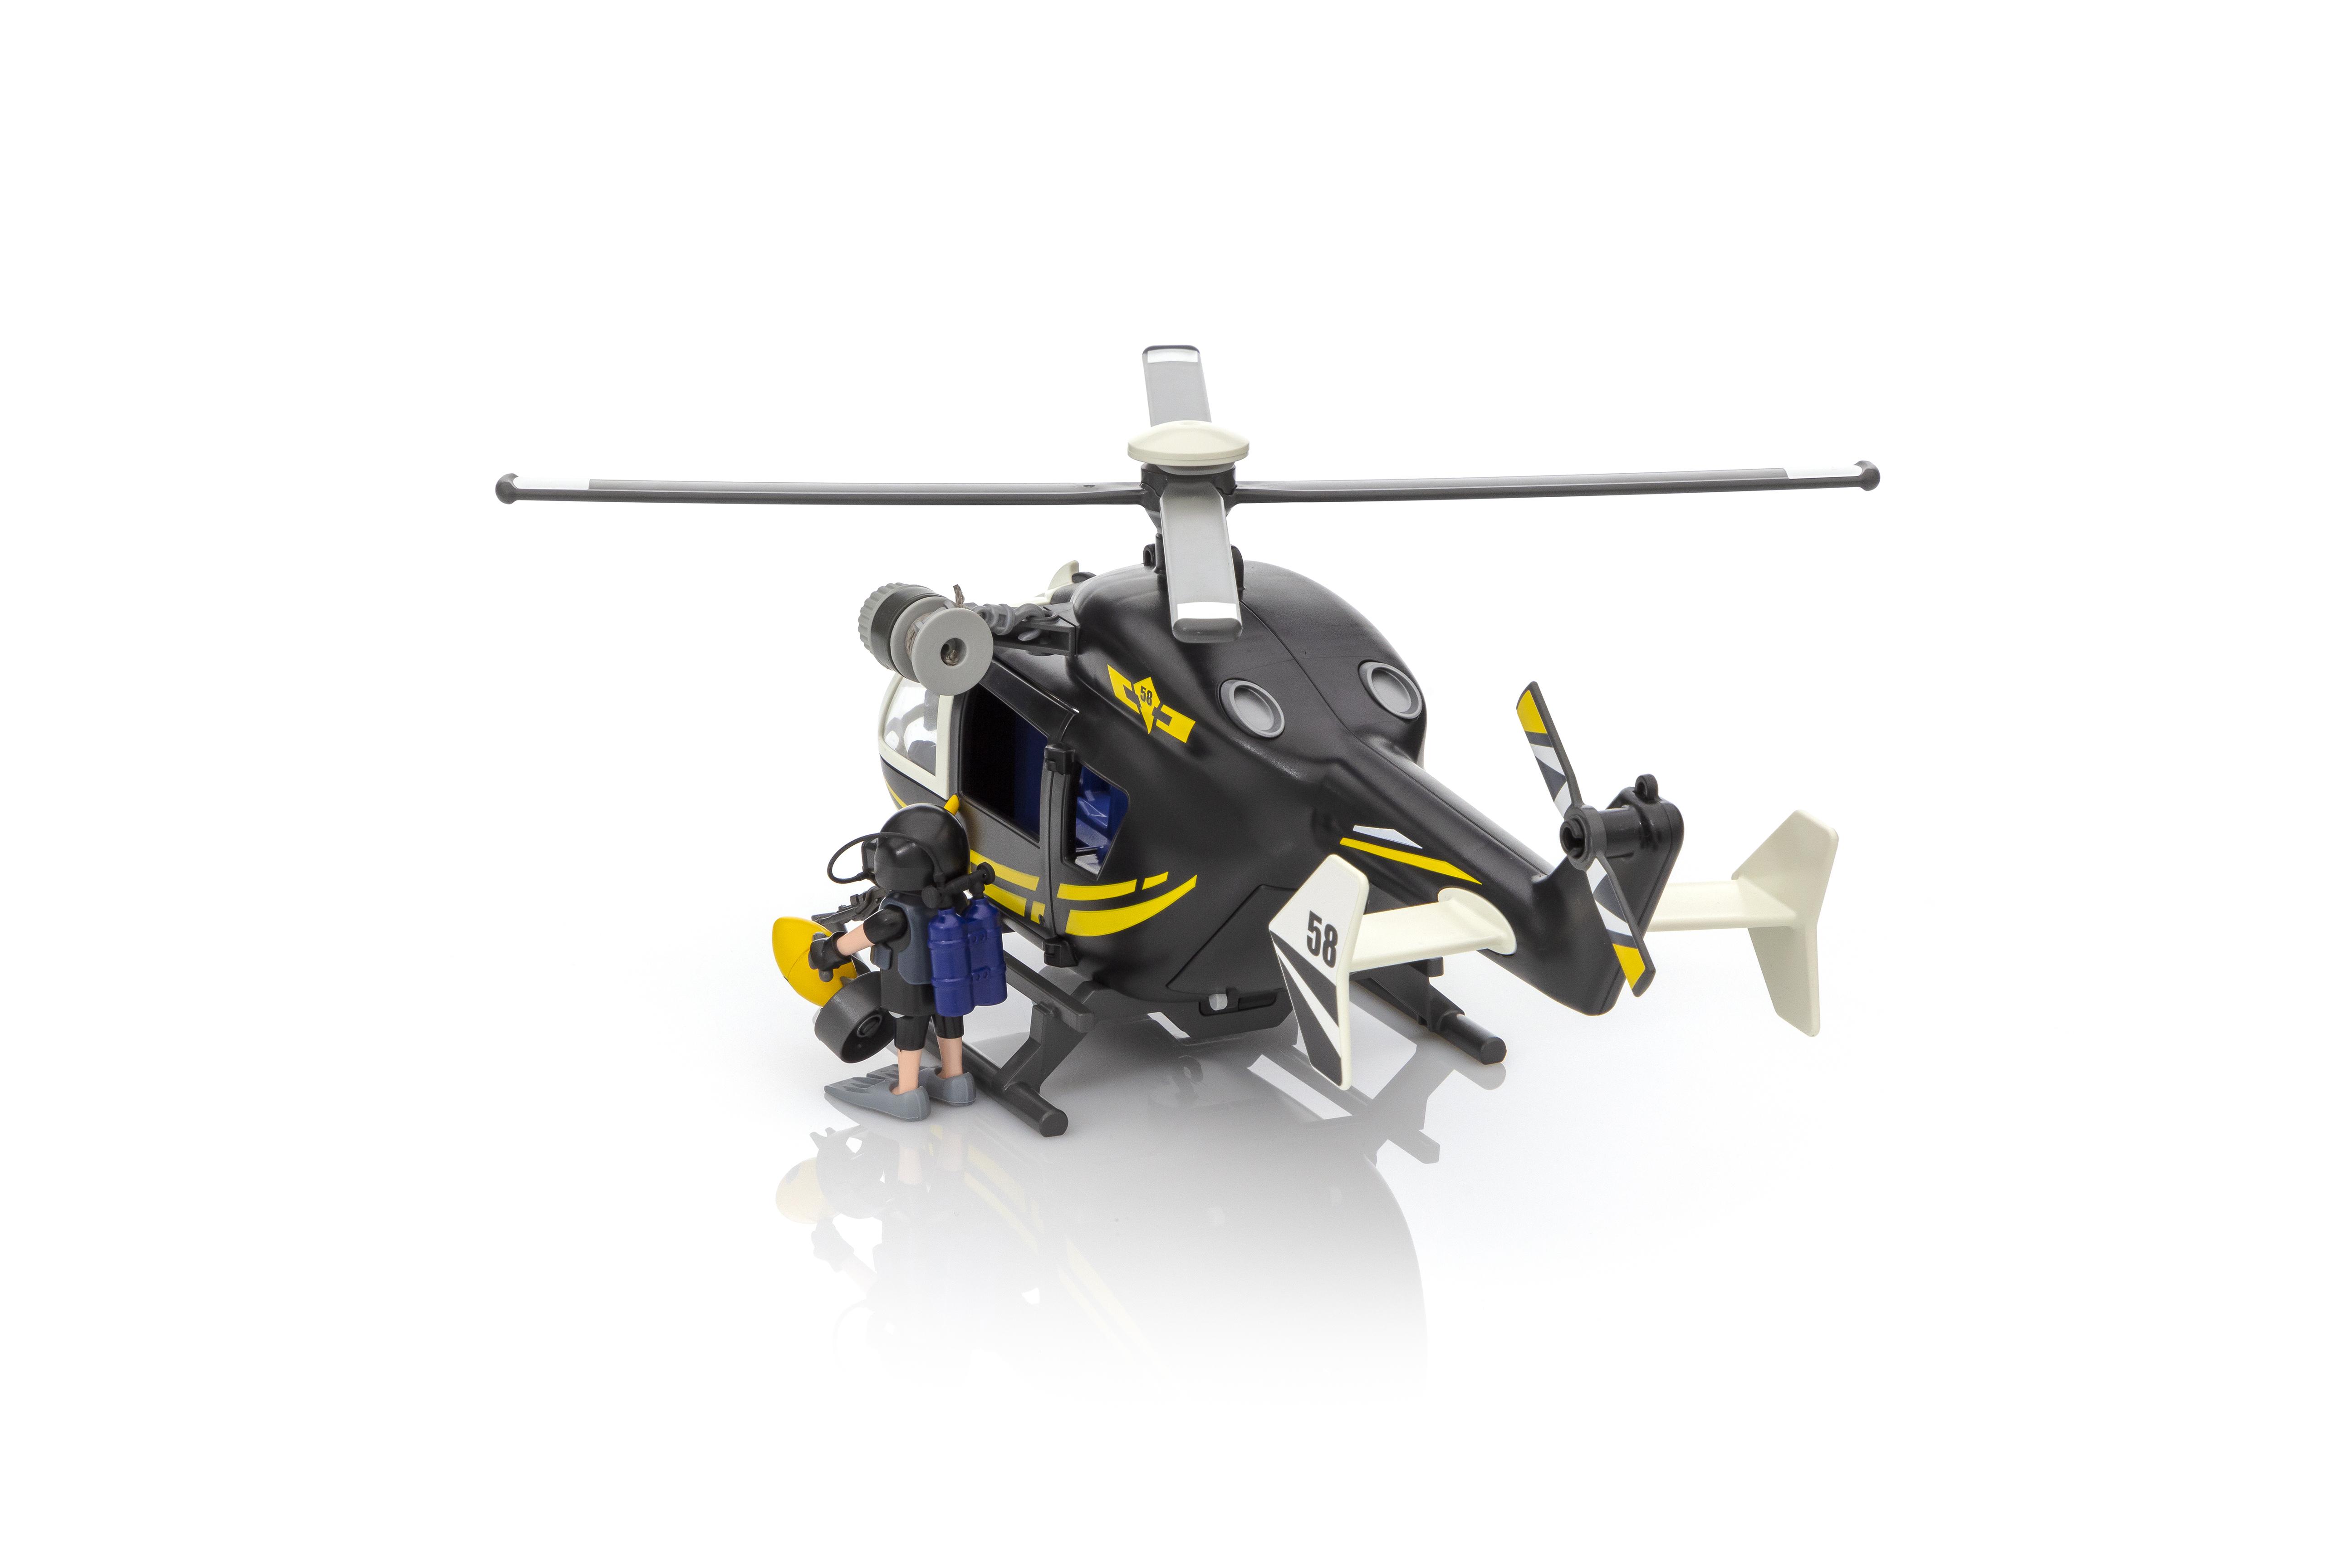 helicoptere playmobil 9363